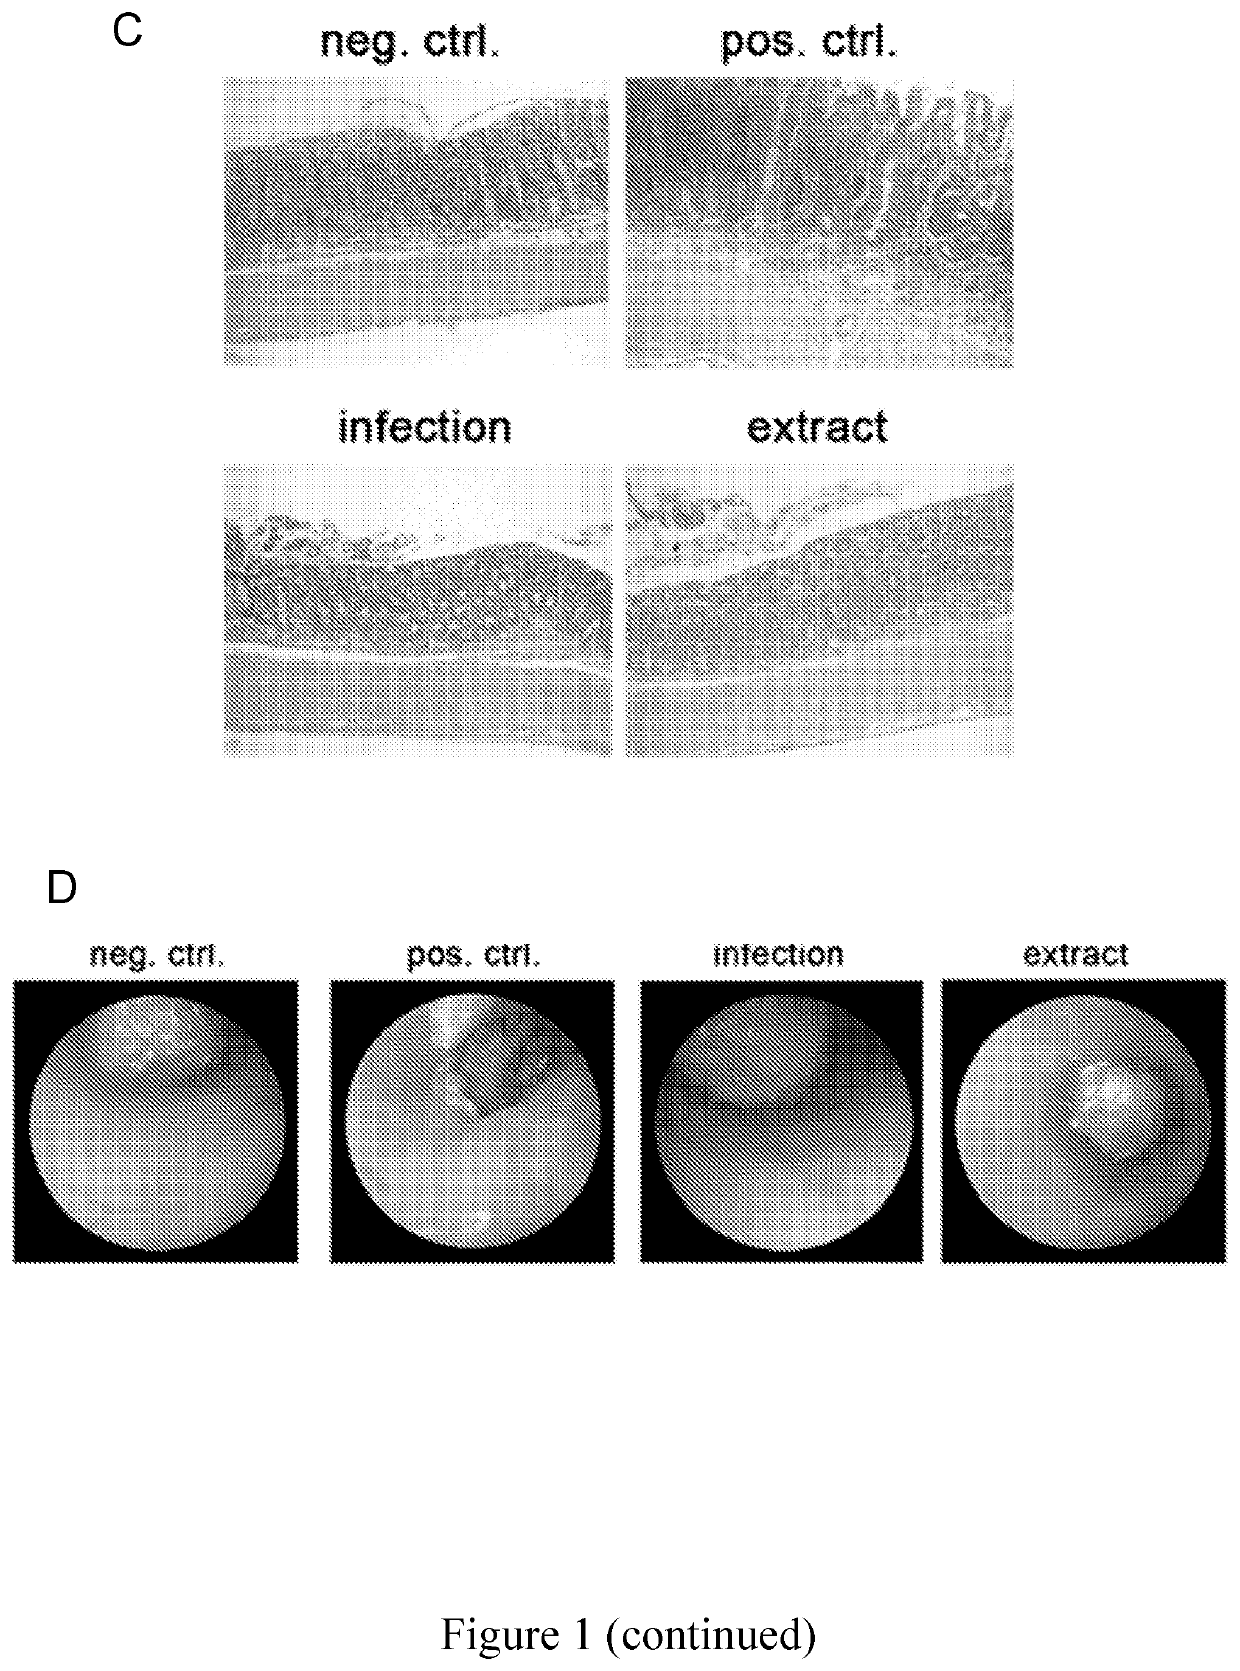 Use of heliocbacter pylori extract for treating or preventing inflammatory bowel diseases and coeliac disease